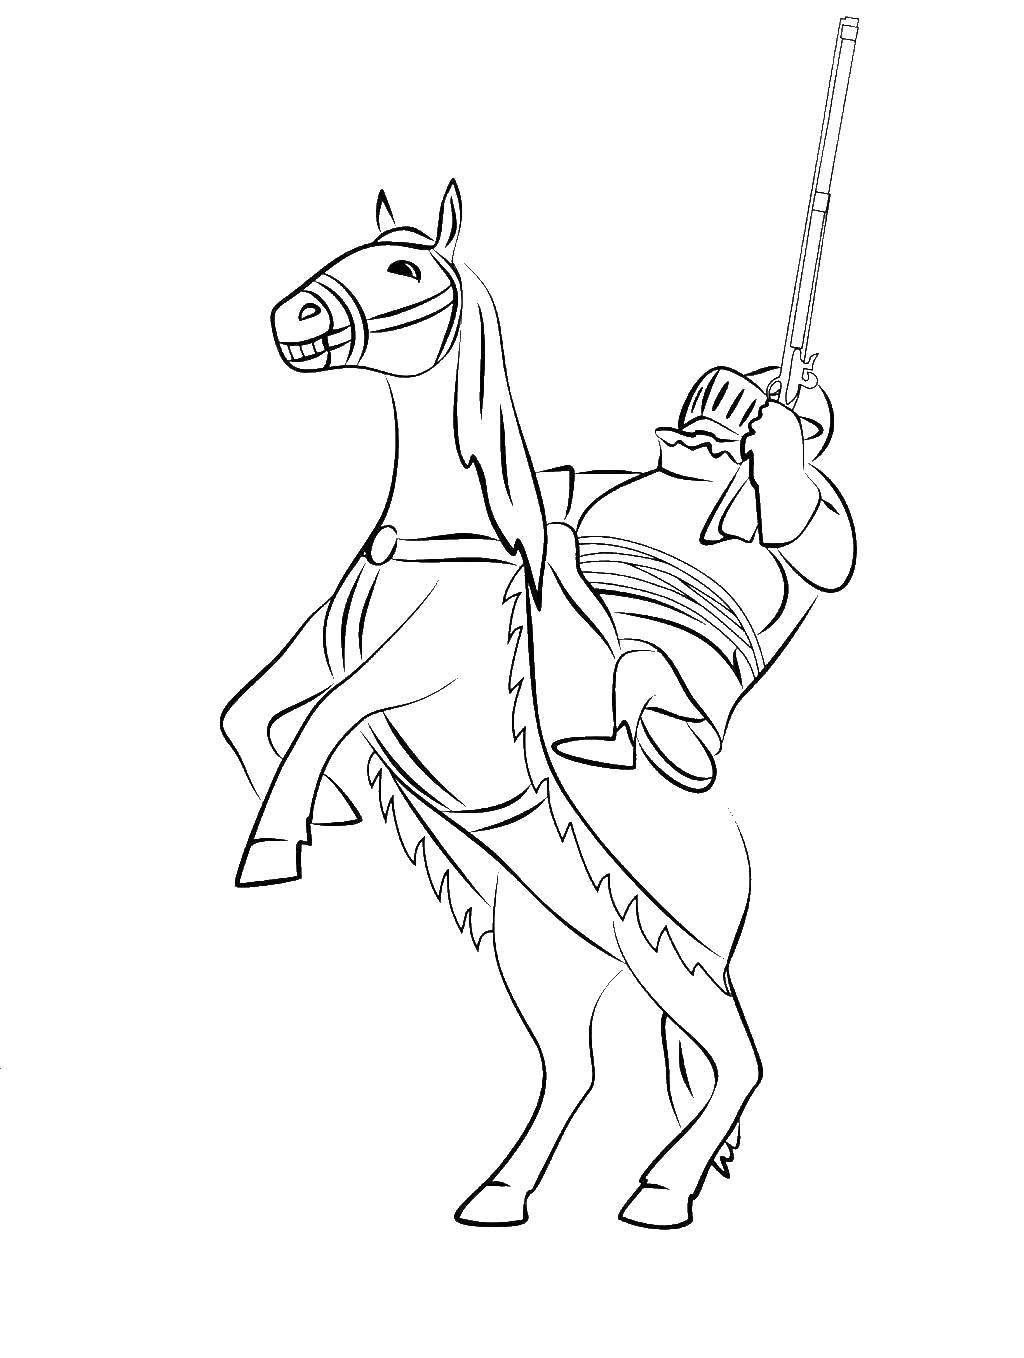 Coloring King on horseback. Category Knights . Tags:  The king, the horse. warrior, knight.